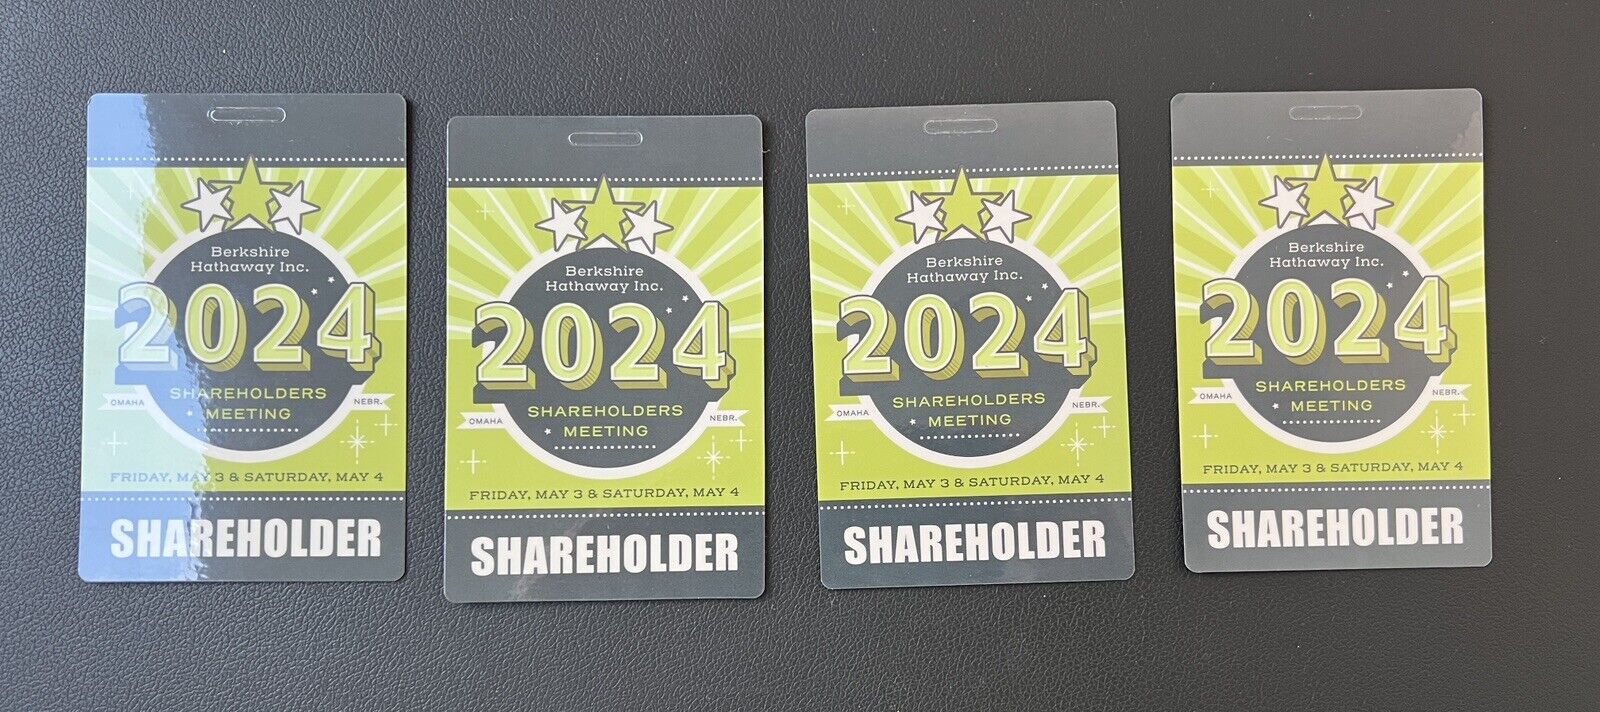 4 BERKSHIRE HATHAWAY 2024 ANNUAL MEETING PASSES Credentials Badges ...